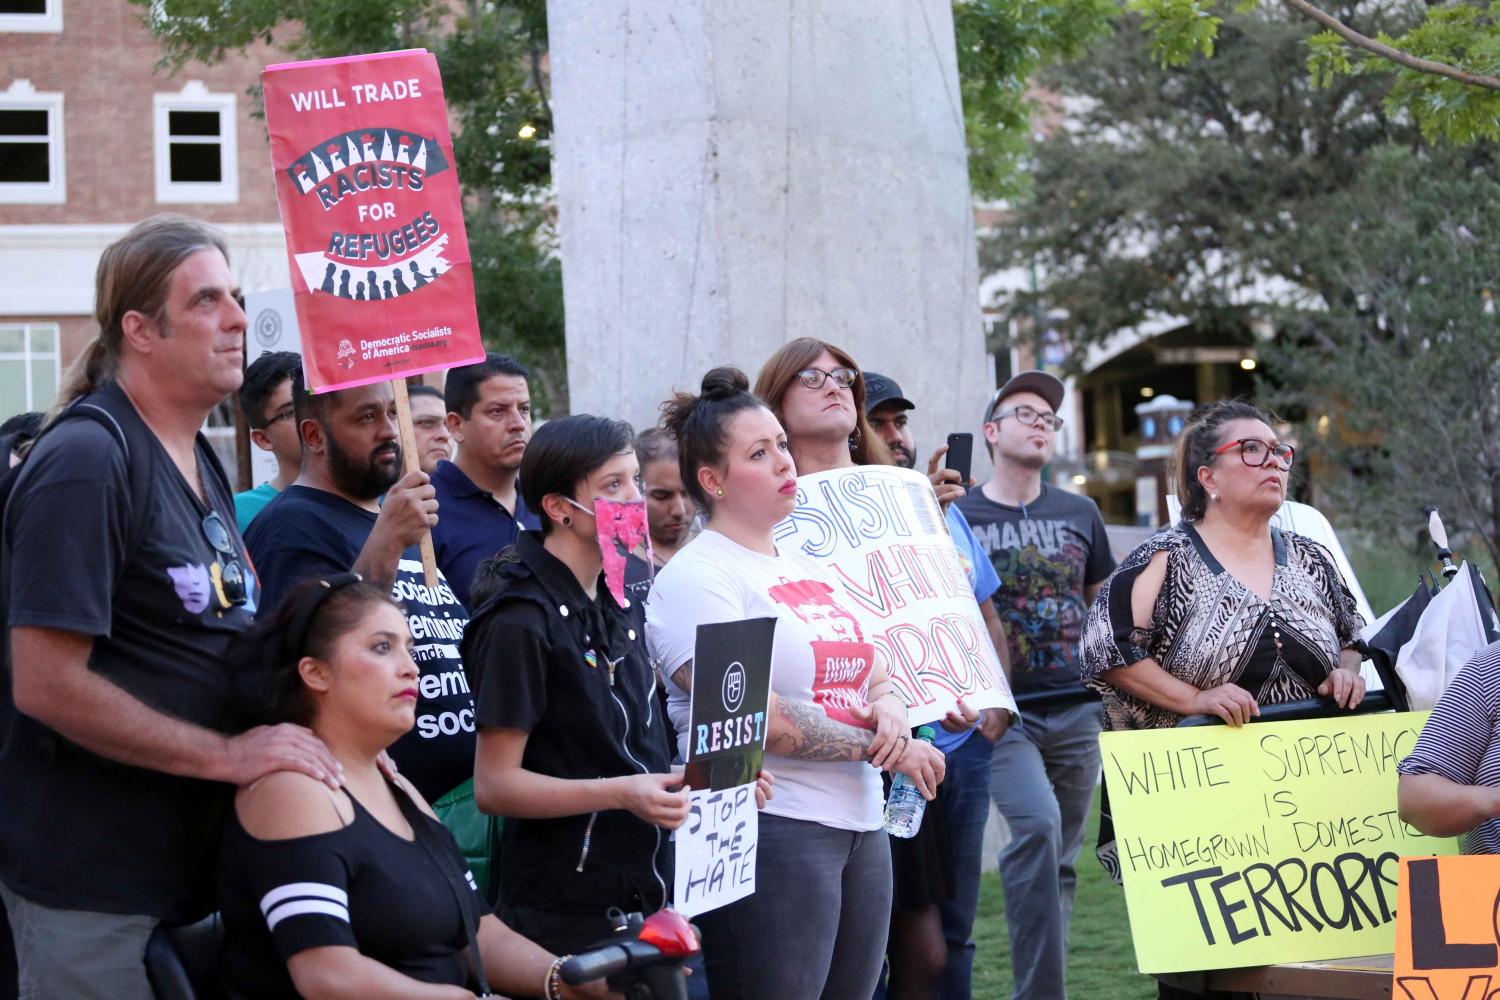 Solidarity Against Fascism and Hate brings civil rights organizations together at San Jacinto